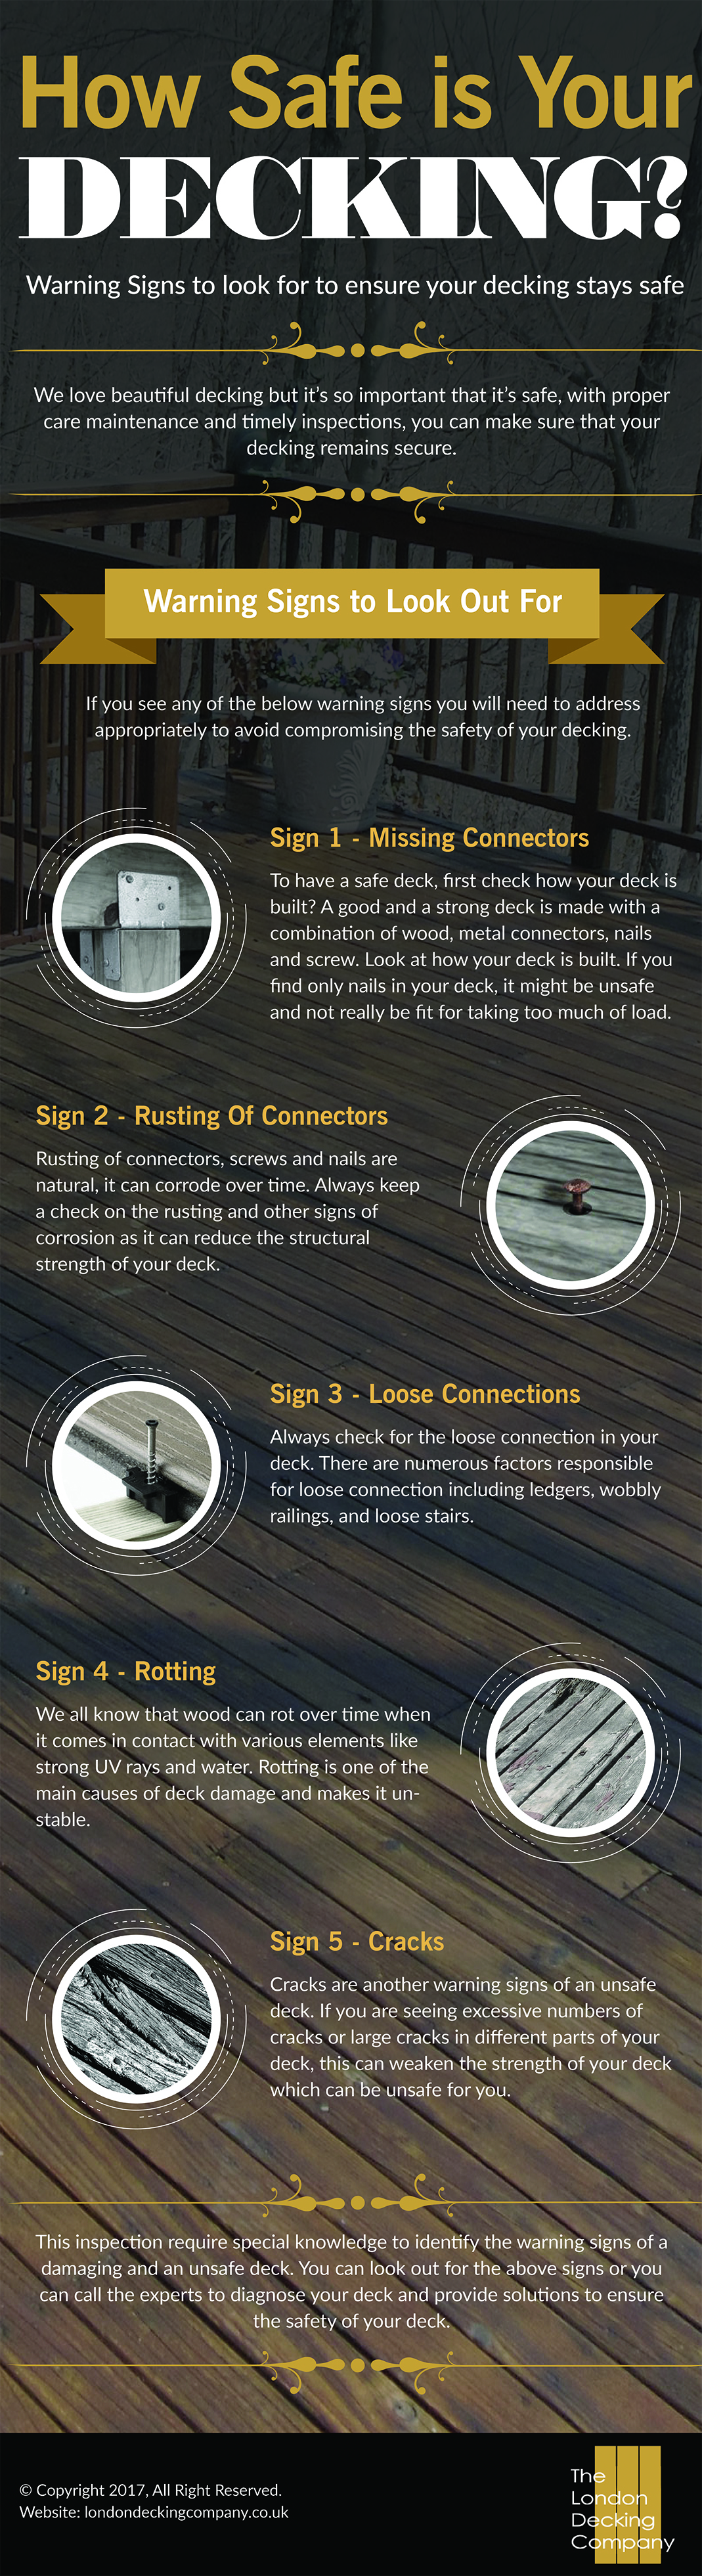 How Safe Is Your Decking?